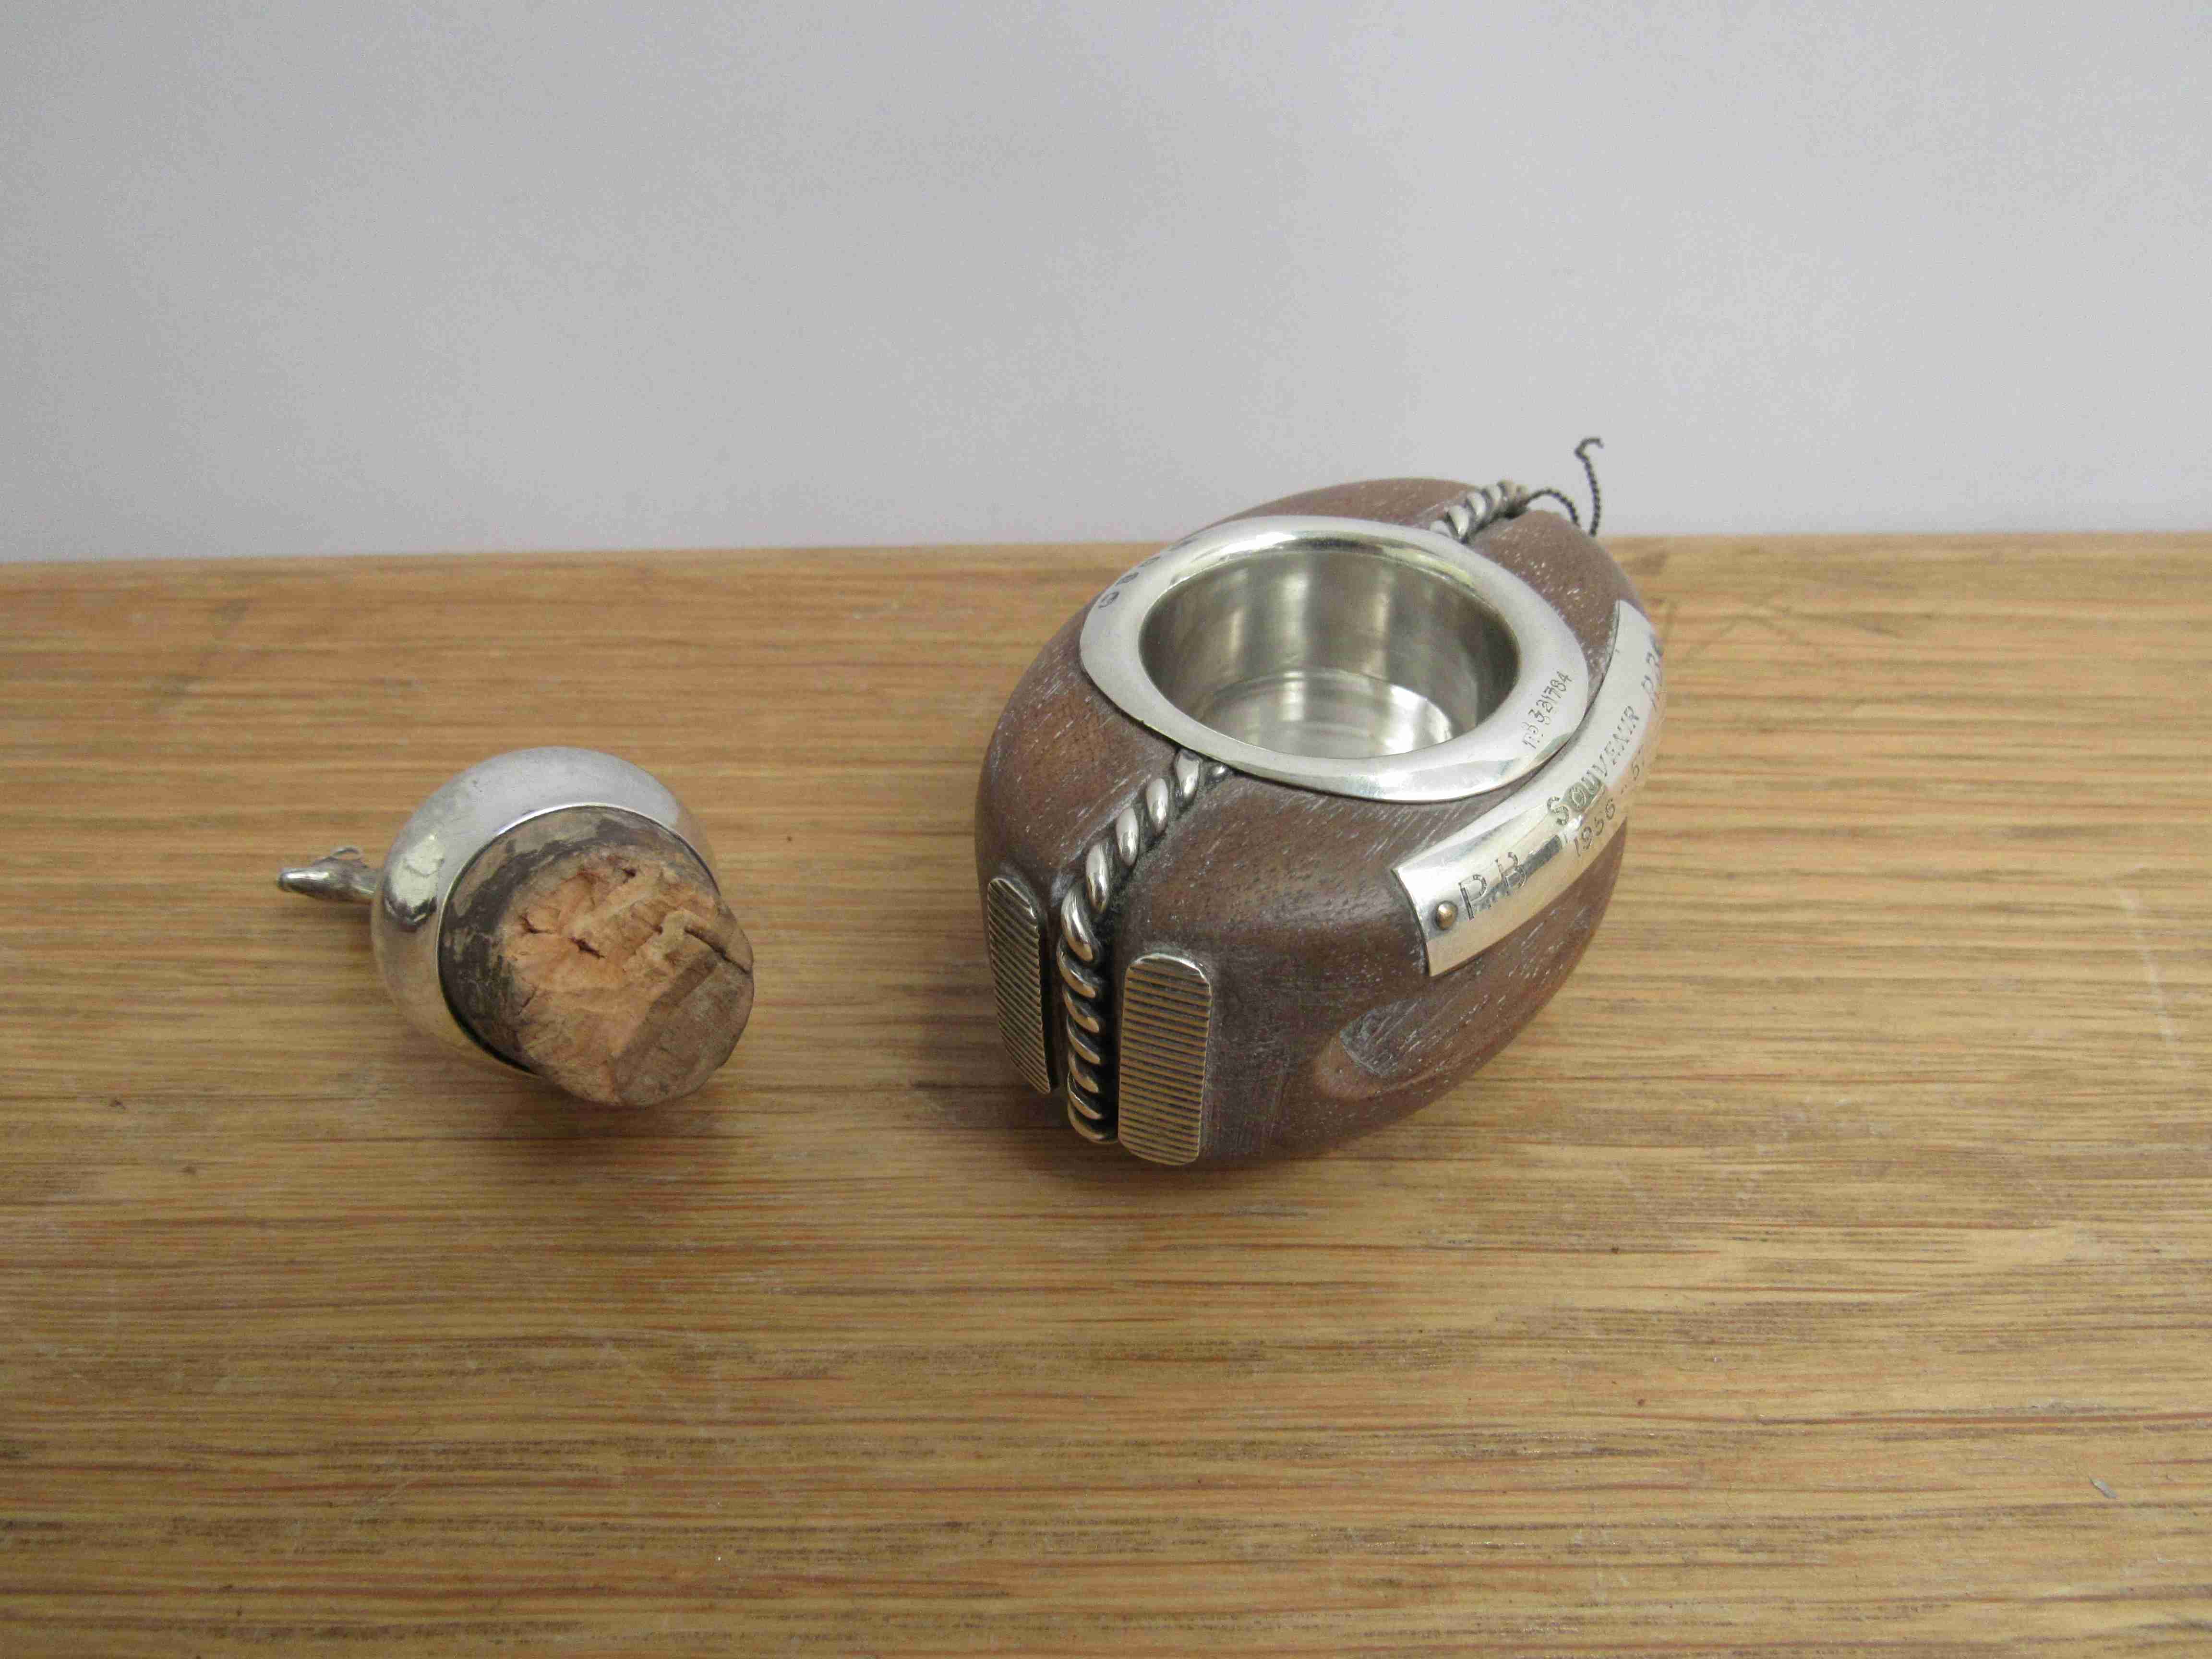 A Lawrence Emanuel novelty silver mounted hardwood boat pulley - match striker with a deer wine - Image 2 of 3